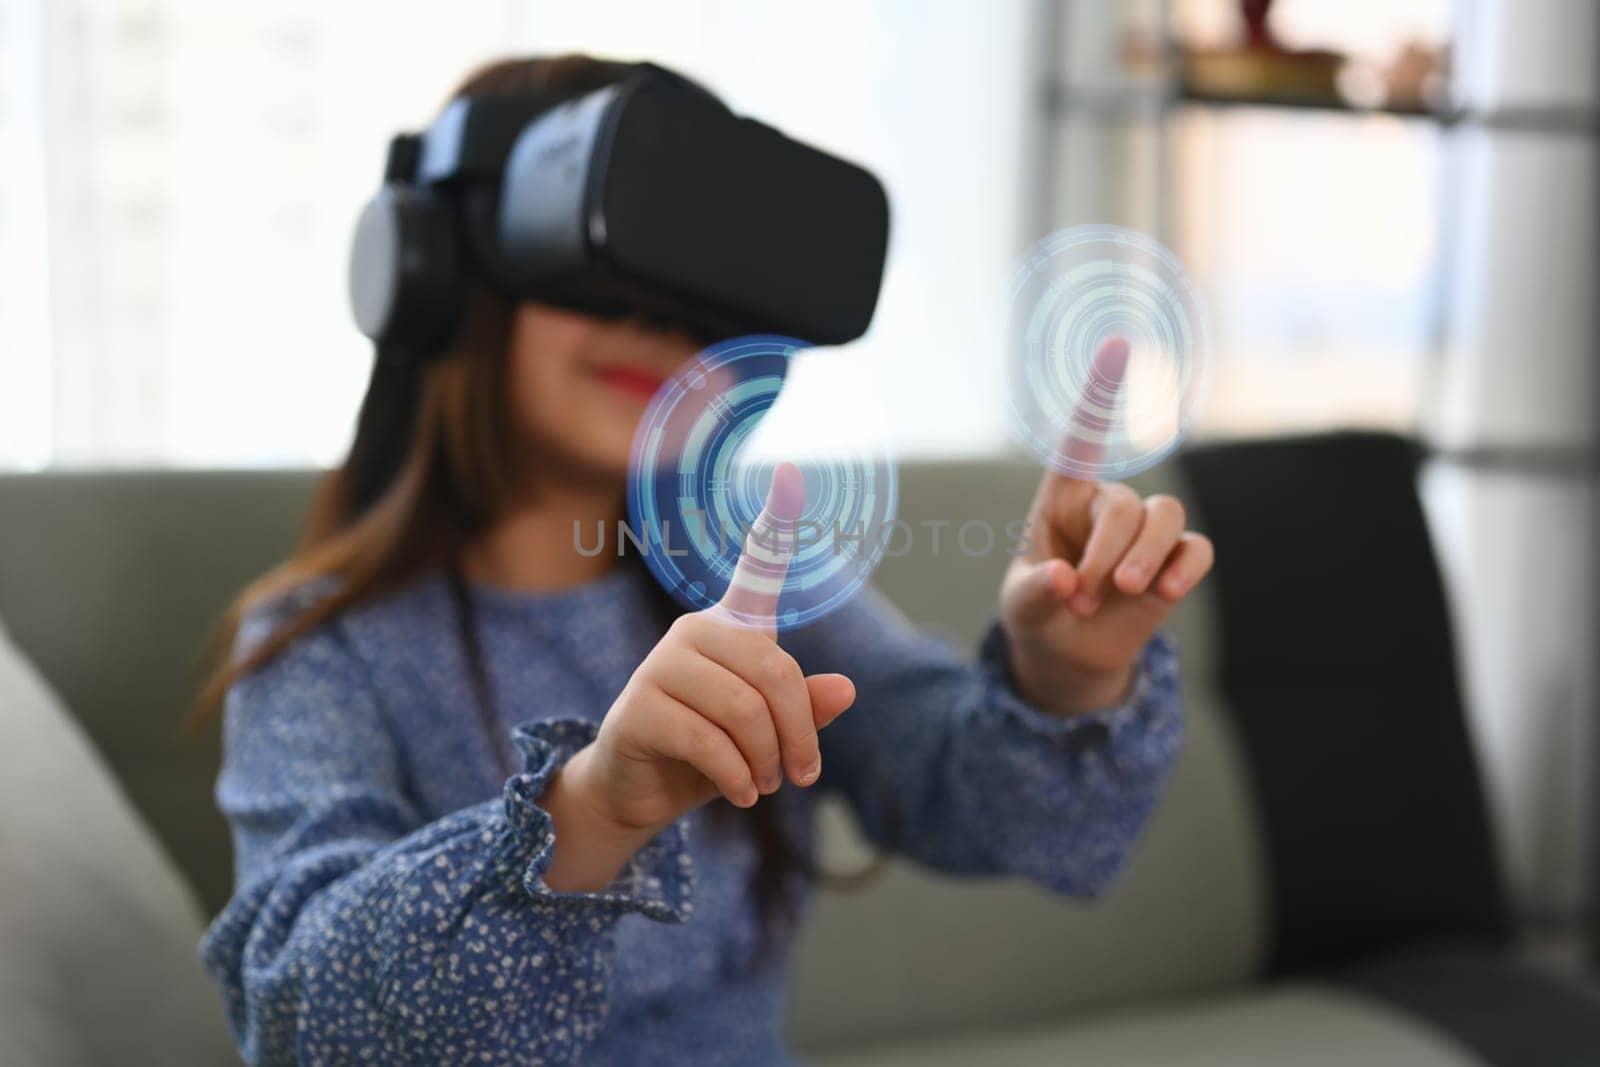 Little girl wearing VR headset and touching virtual button interacting with digital interface.